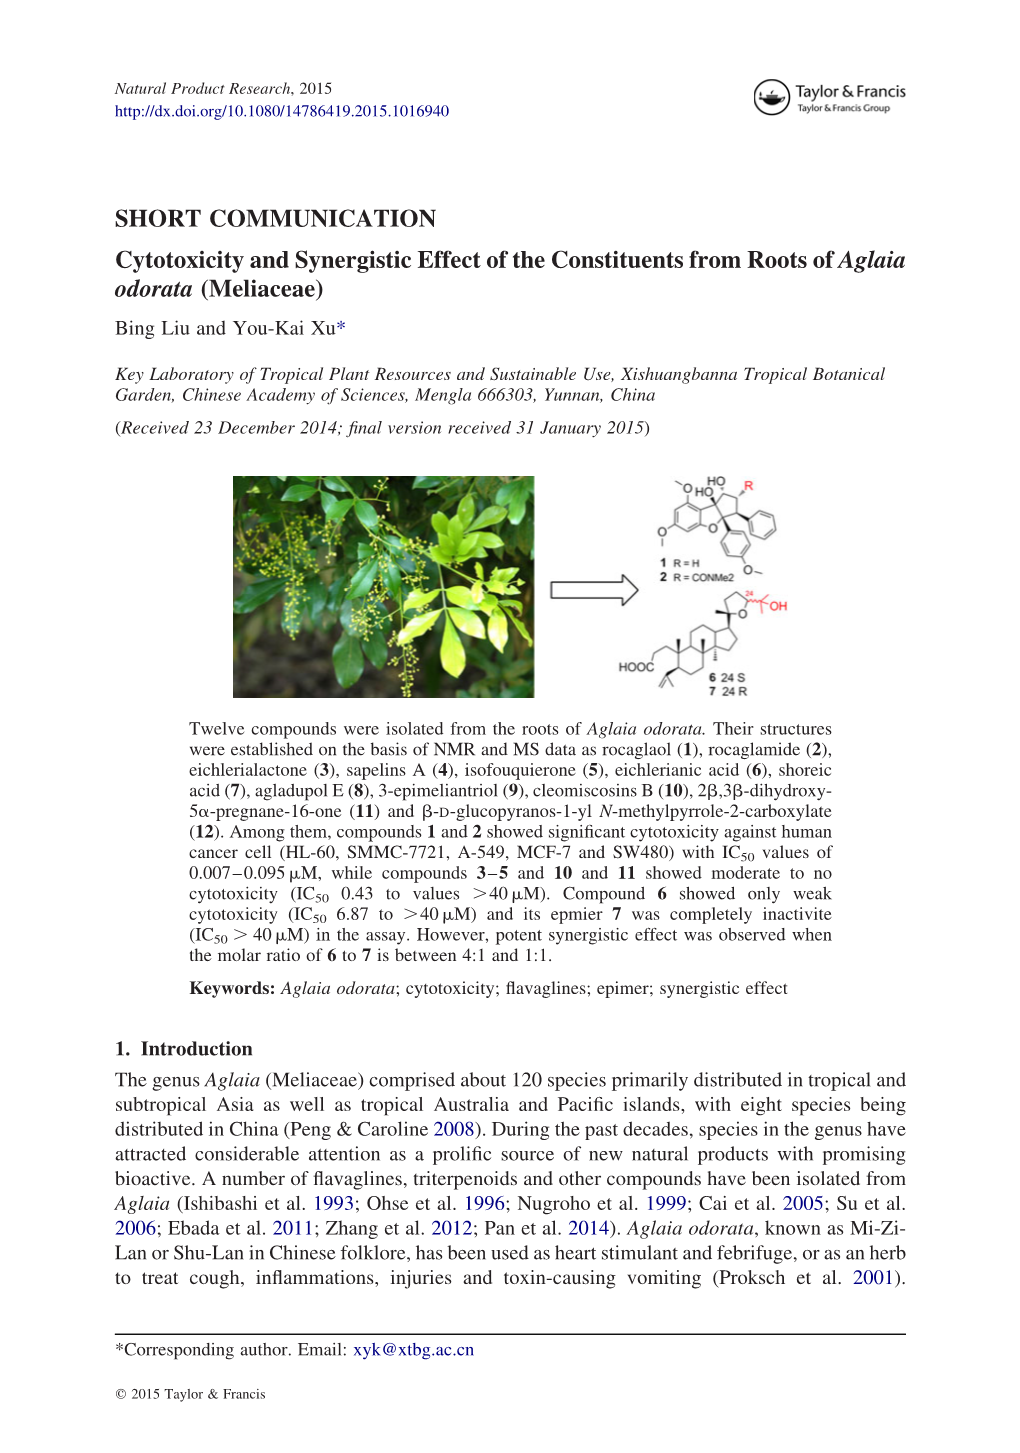 SHORT COMMUNICATION Cytotoxicity and Synergistic Effect of the Constituents from Roots of Aglaia Odorata (Meliaceae) Bing Liu and You-Kai Xu*